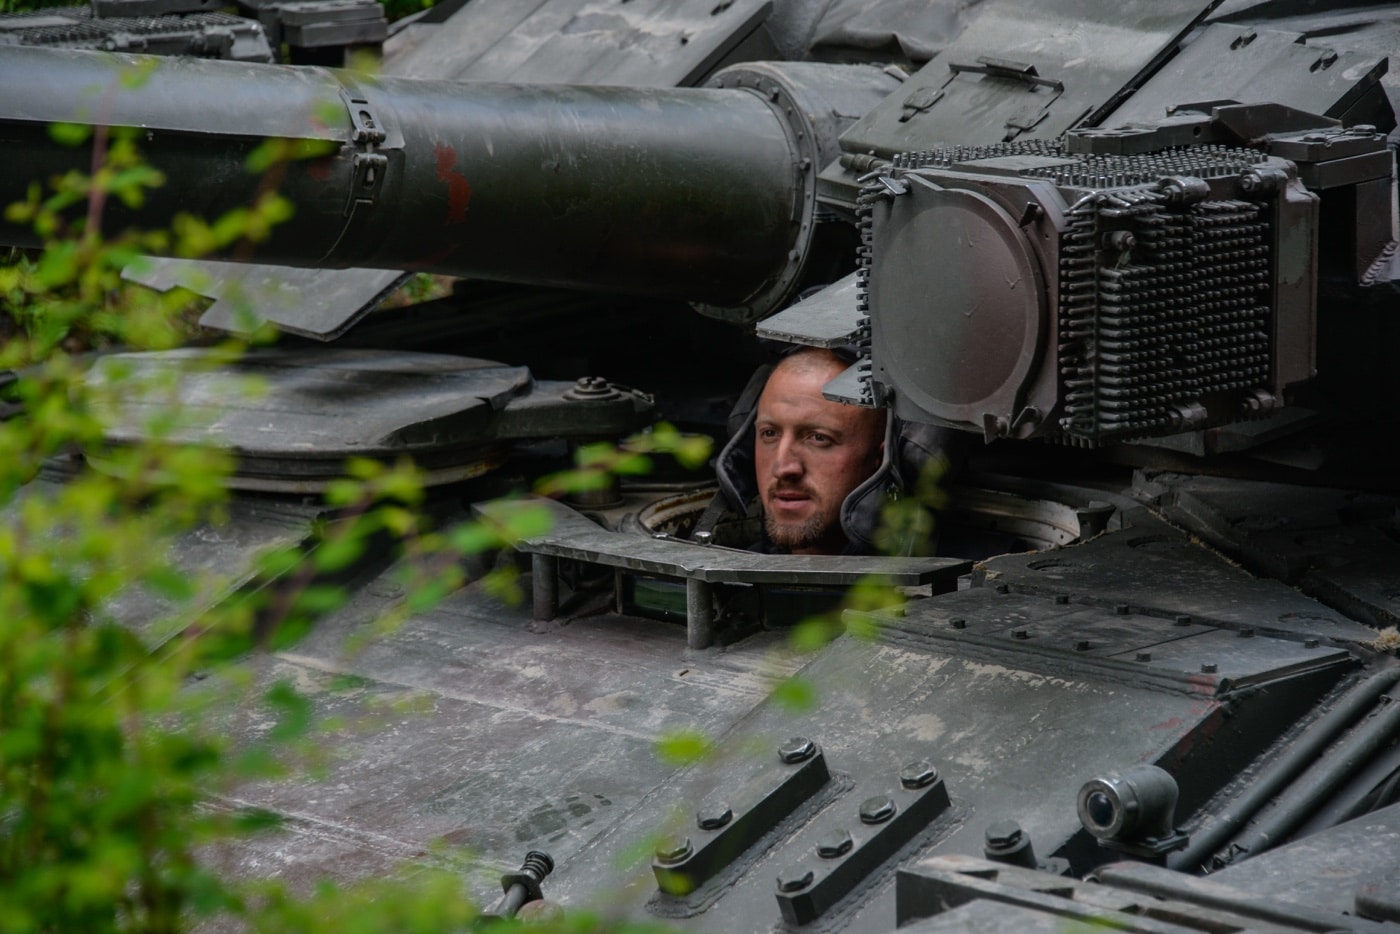 A Ukrainian T-84 tank driver peers out of his hatch as he maneuvers his tank into a defensive position. The heavy armor of the tank protects the crew but also limits visibility.